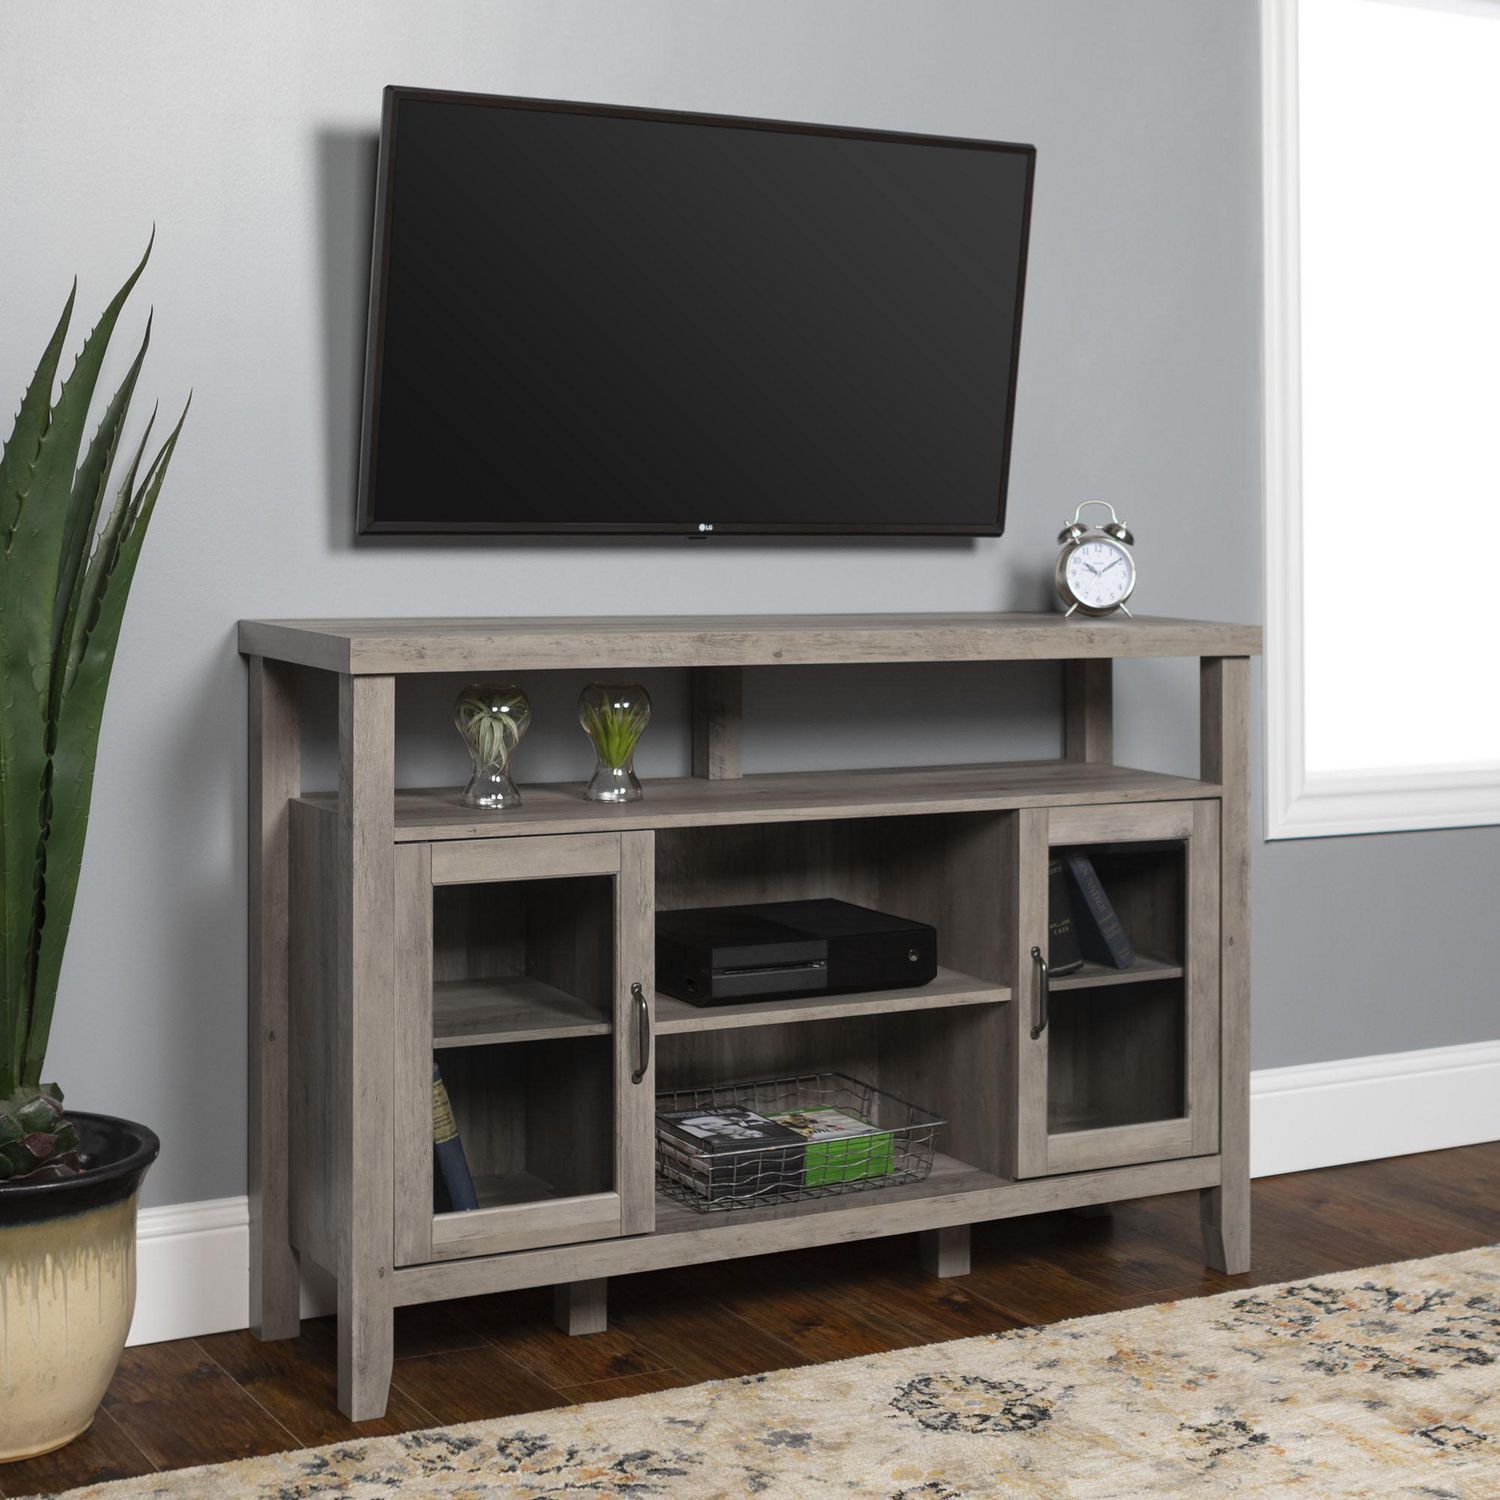 Manor Park Rustic Farmhouse Tv Stand For Tv's Up To 56" – Multiple Within Modern Farmhouse Rustic Tv Stands (Gallery 11 of 20)